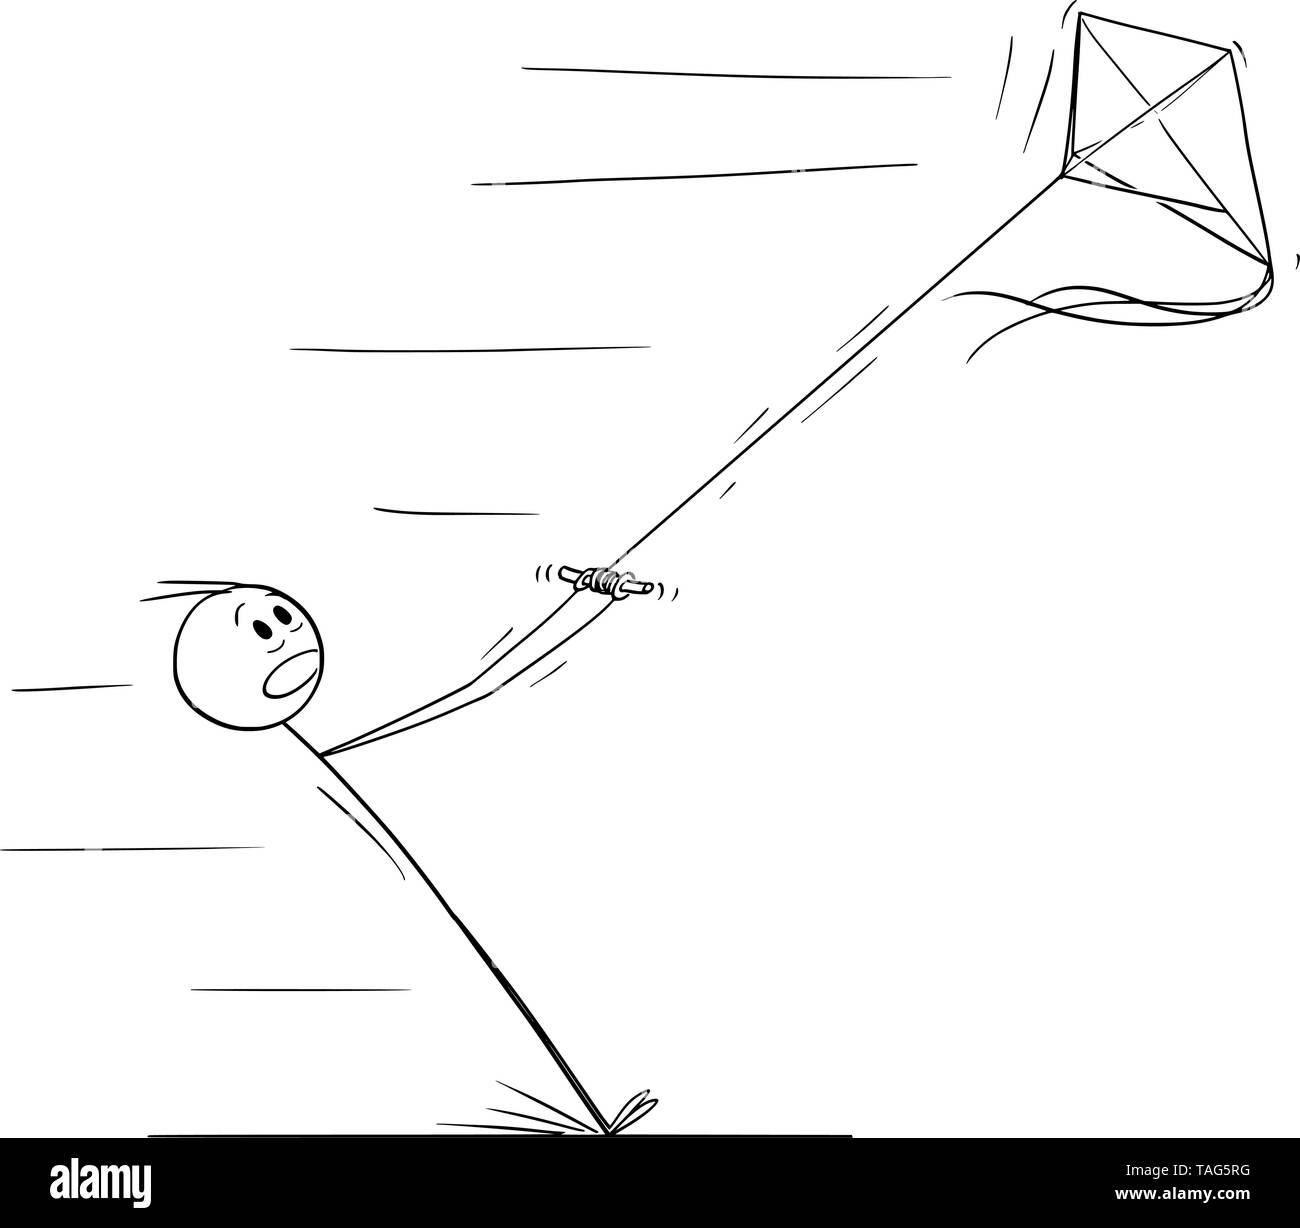 Vector cartoon stick figure drawing conceptual illustration of man flying kite and pulled away in strong wind. Stock Vector